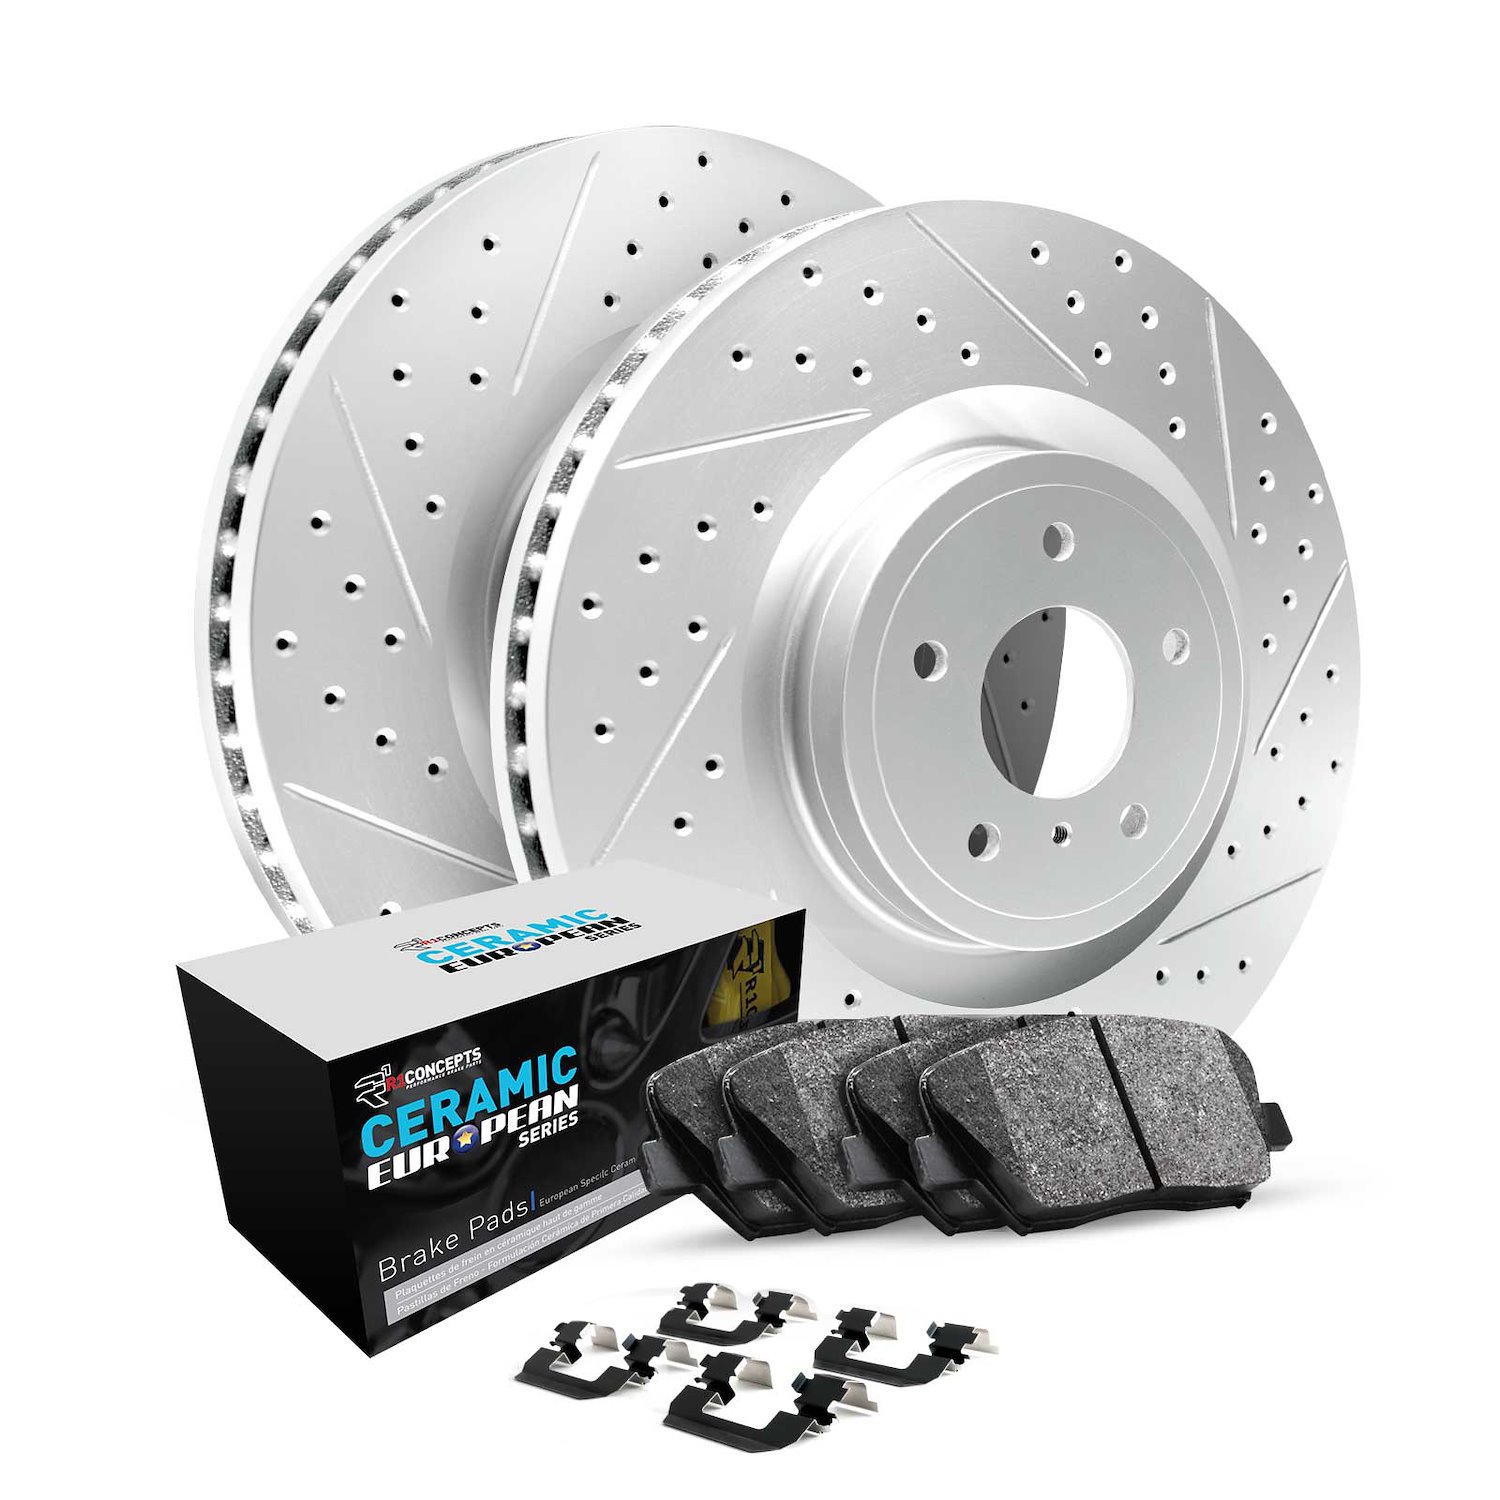 GEO-Carbon Drilled & Slotted Brake Rotor Set w/Euro Ceramic Pads & Hardware, Fits Select Fits Multiple Makes/Models